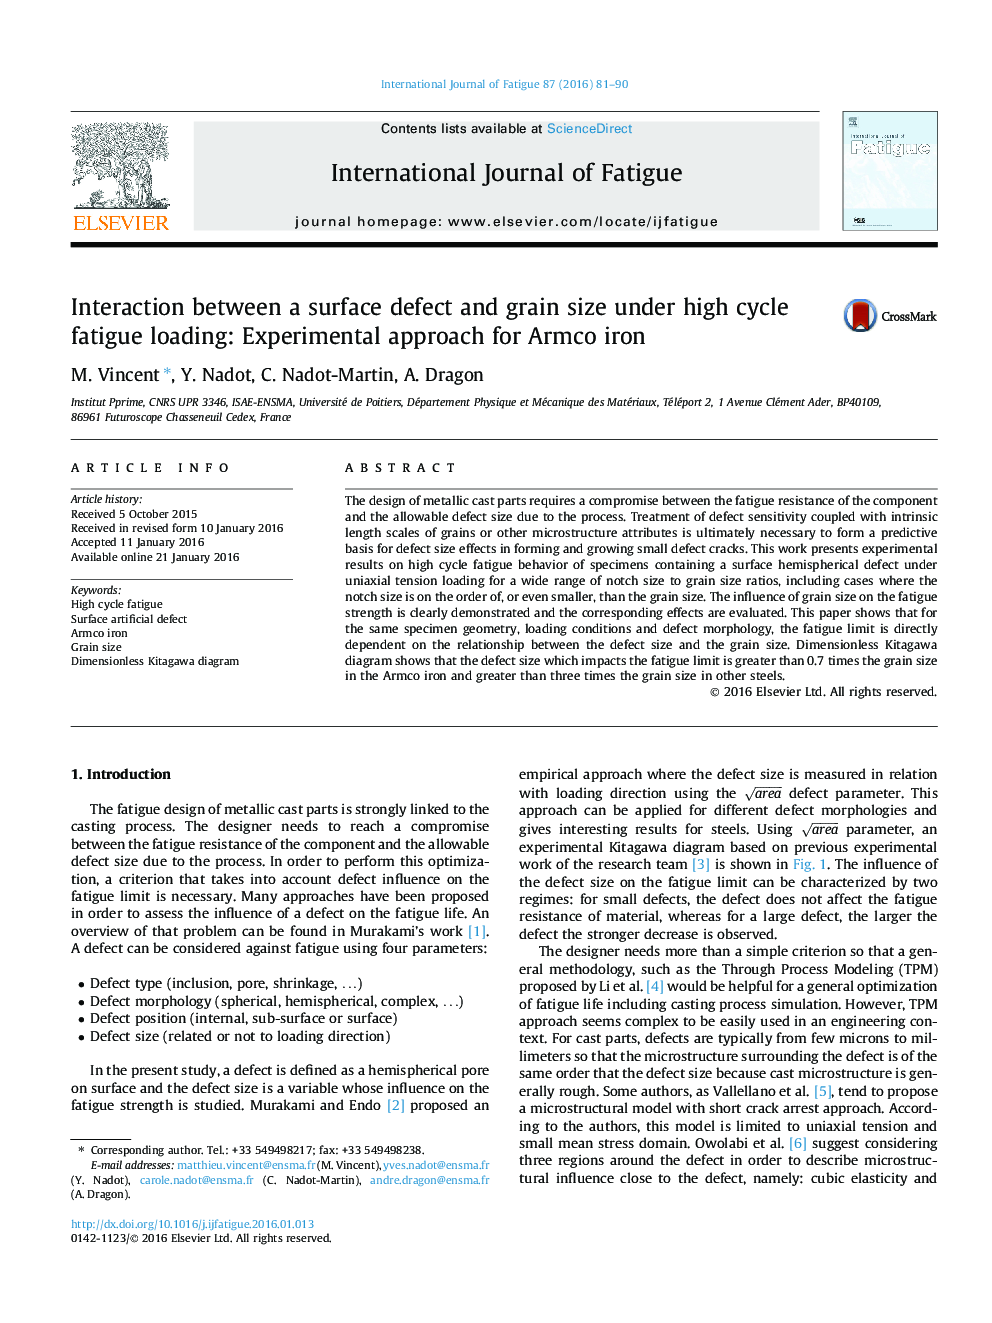 Interaction between a surface defect and grain size under high cycle fatigue loading: Experimental approach for Armco iron